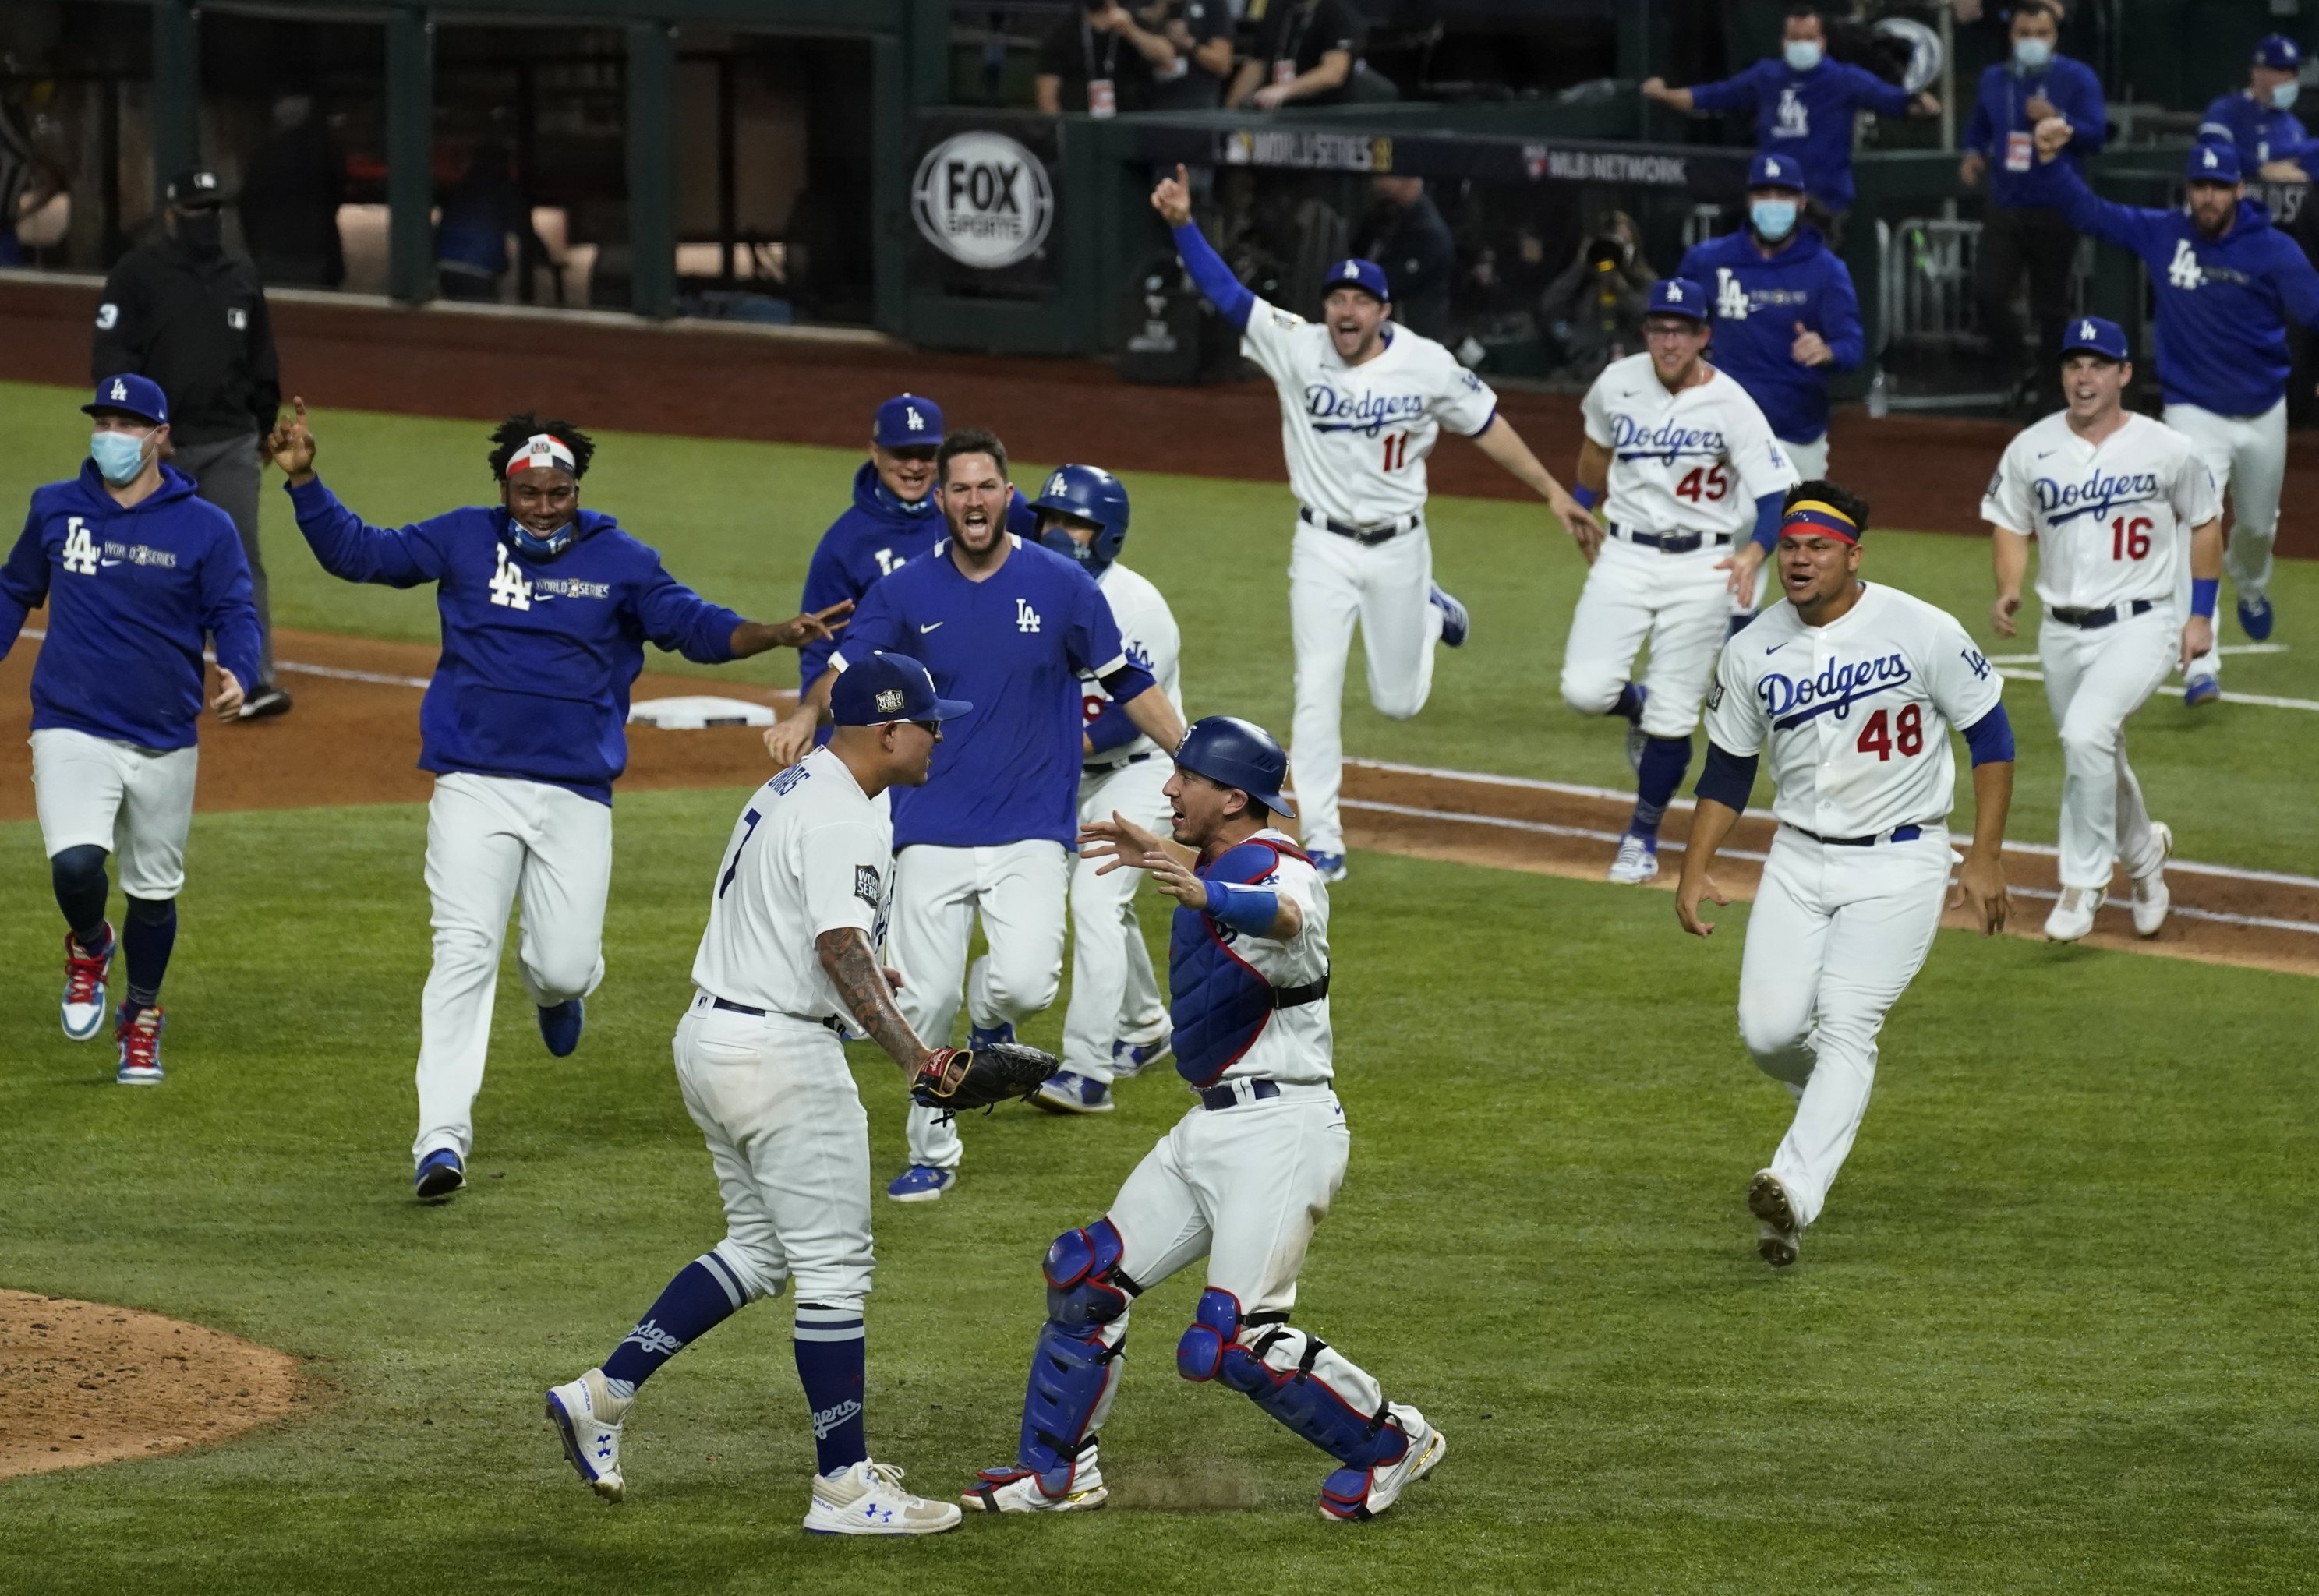 2021 MLB season preview -- Power rankings, best (and worst) case